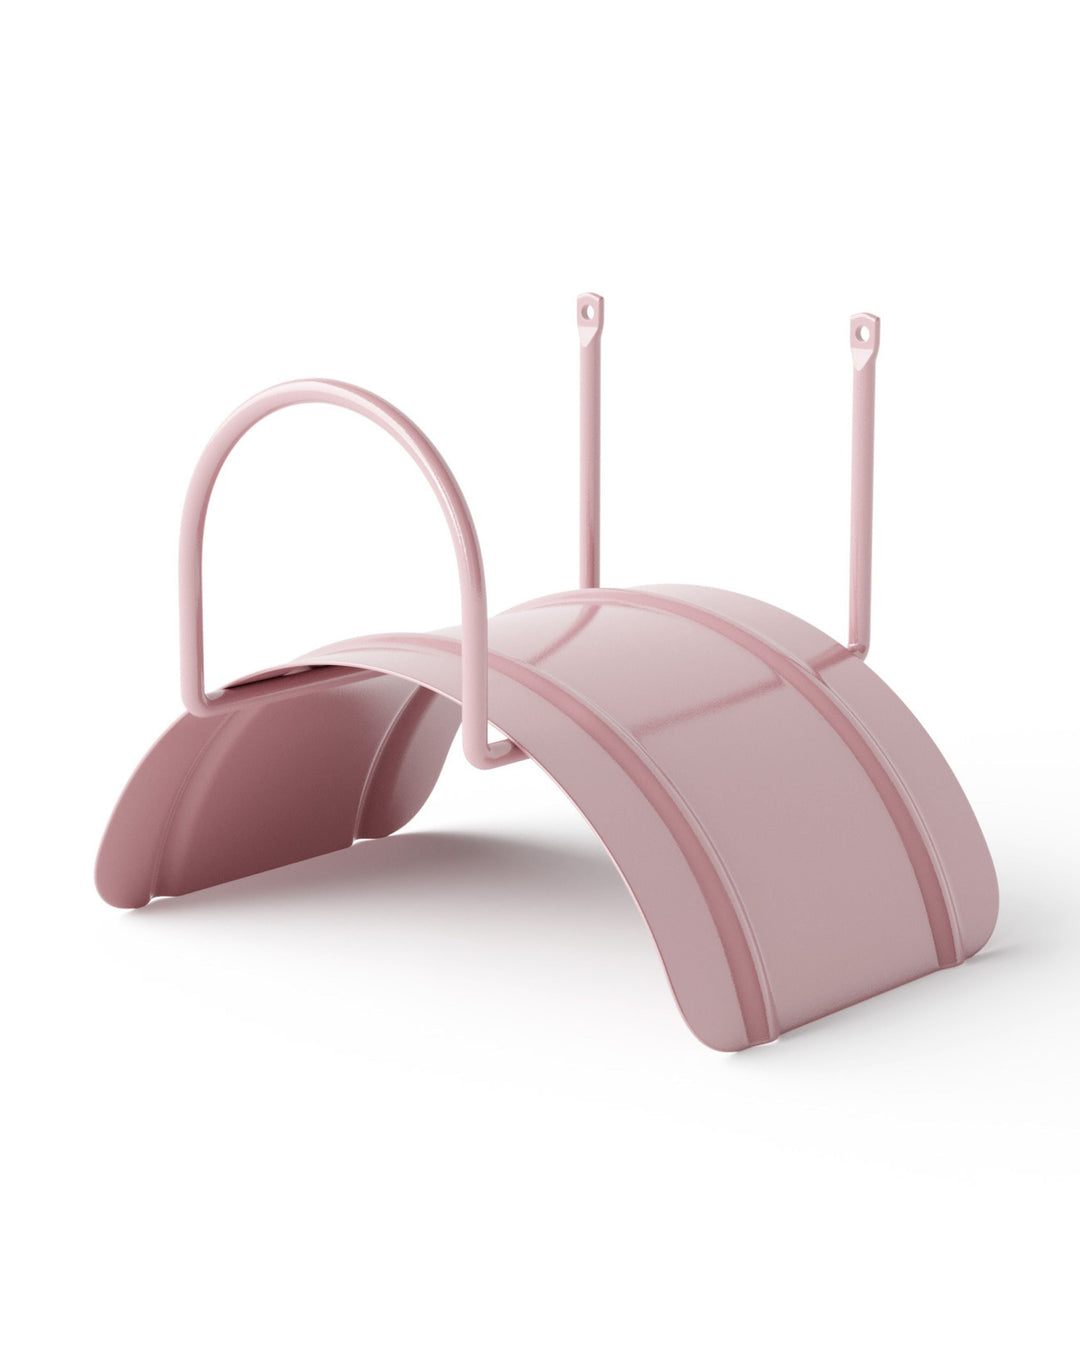 a pink playground set with a curved slide